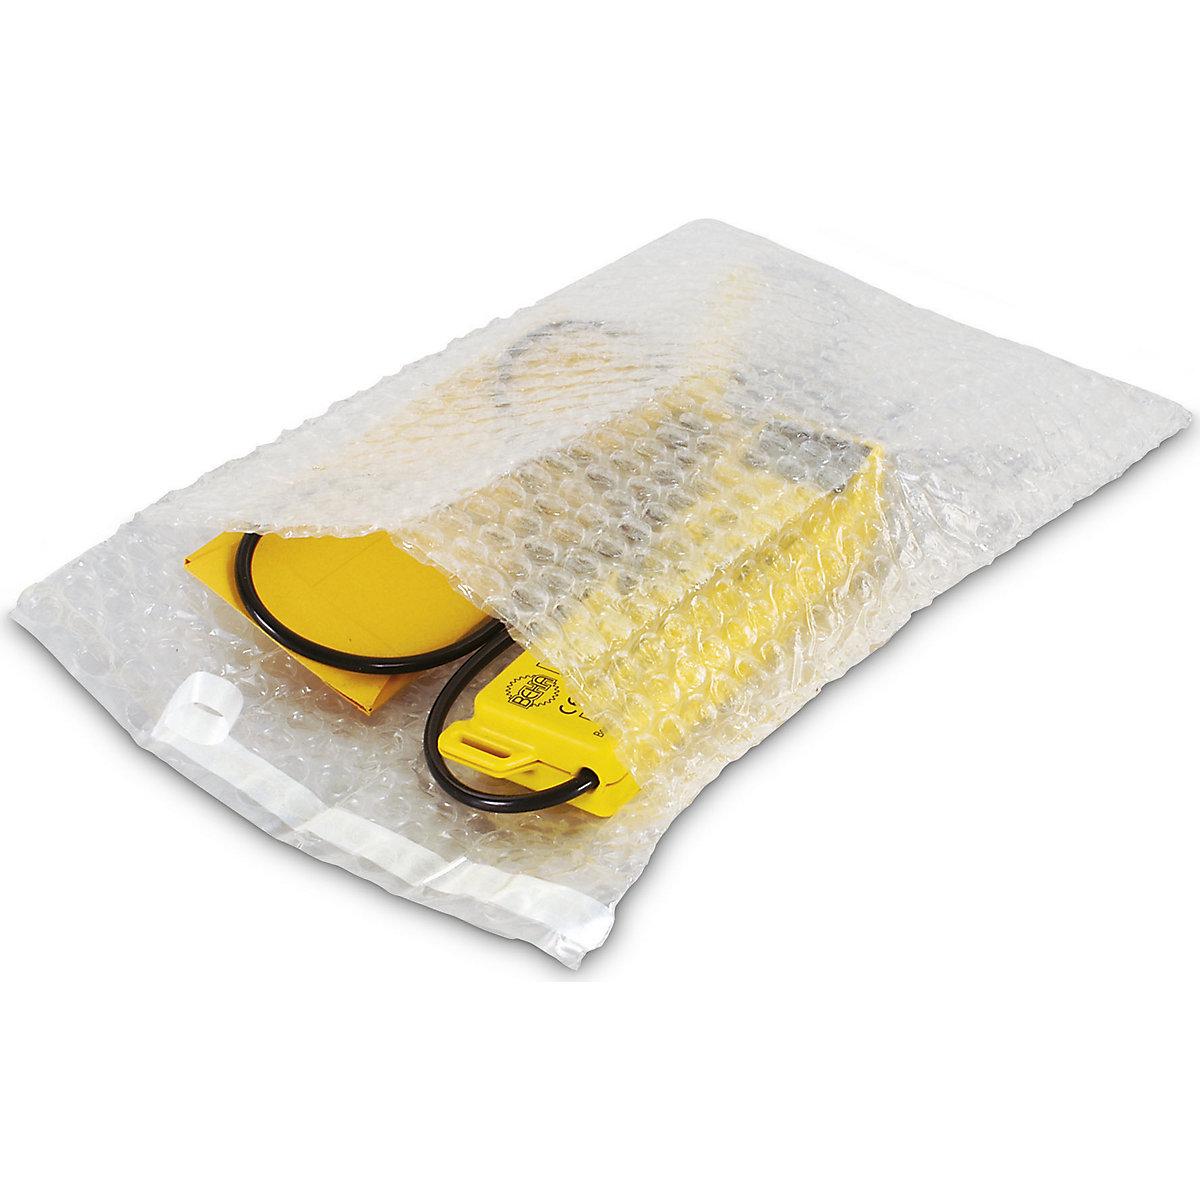 Bubble Wrap Bags - SAM packaging company